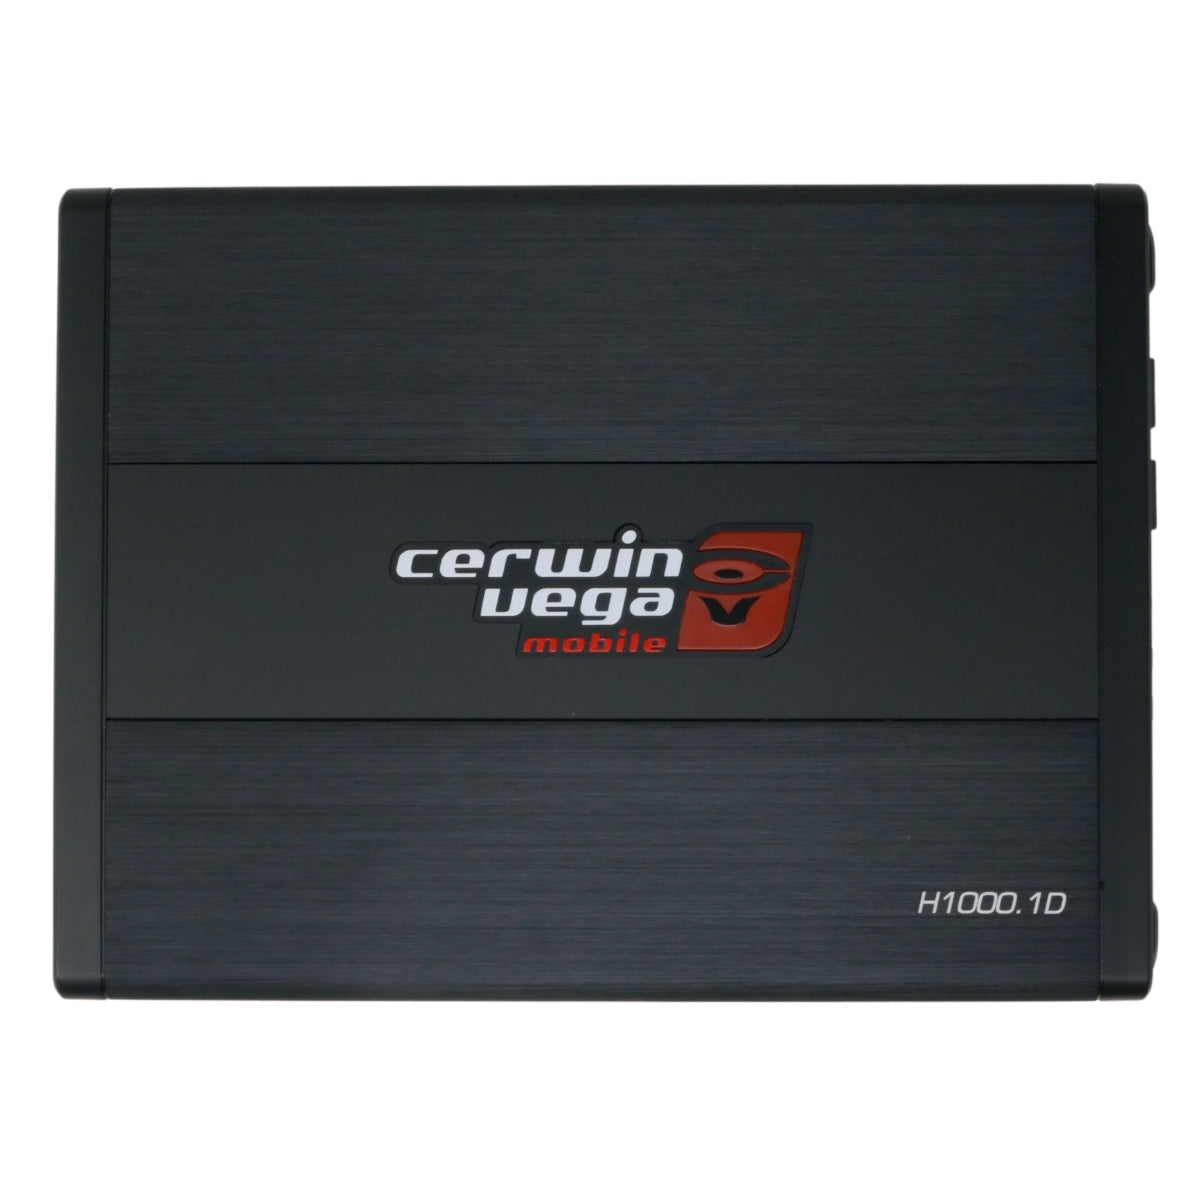 The image shows a Cerwin Vega Inc. HED 1000W RMS Class-D Mono Digital Amplifier. It has a sleek, rectangular design with a dark metallic finish. The Cerwin Vega Inc. logo is prominently displayed in the center with the text "mobile" underneath and the model number "H1000.1D" in the bottom right corner, showcasing its 1 Channel Digital Monobloc Amplifier.